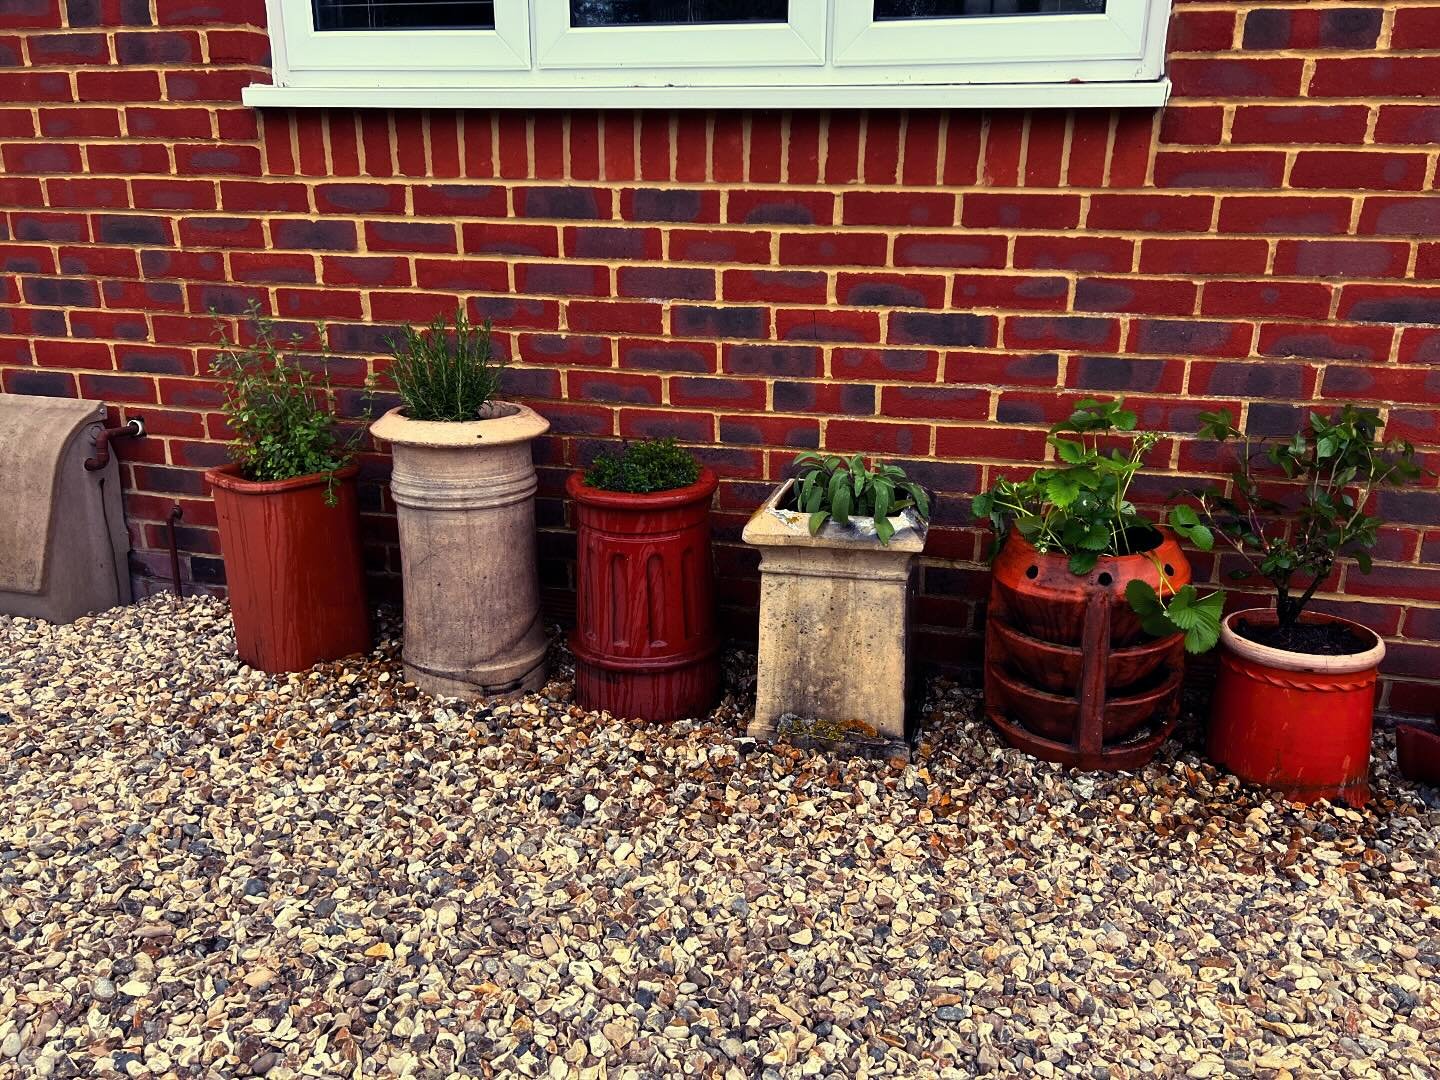 Today&rsquo;s  photo sees the credit going to my mother in law 👵! 

Each pot has a story to go with it and finally we got round to potting some herbs 🪴 strawberries 🍓 and a rose 🥀 in them credit to her green fingers. 

All I have to do is water t